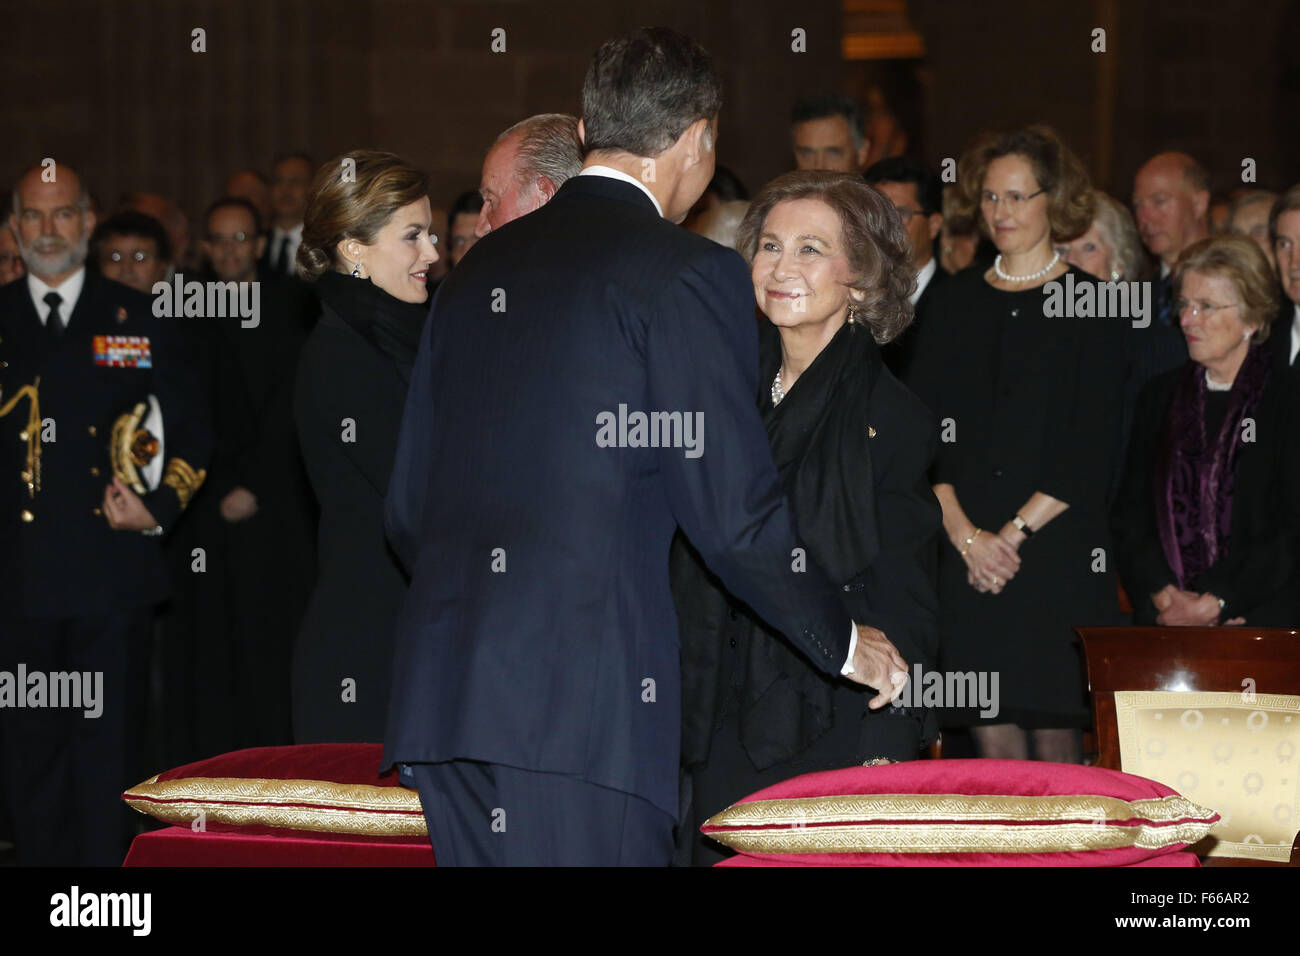 El Escorial, Spain. 12th Nov, 2015. King Juan Carlos of Spain, Queen Sofia of Spain, King Felipe VI of Spain and Queen Letizia of Spain attends the Funeral by His Royal Highness Infante Carlos, Duke of Calabria, Prince of Spain, at San Lorenzo de El Escorial Monastery on November 12, 2015 in El Escorial, Madrid, Spain © Jack Abuin/ZUMA Wire/Alamy Live News Stock Photo